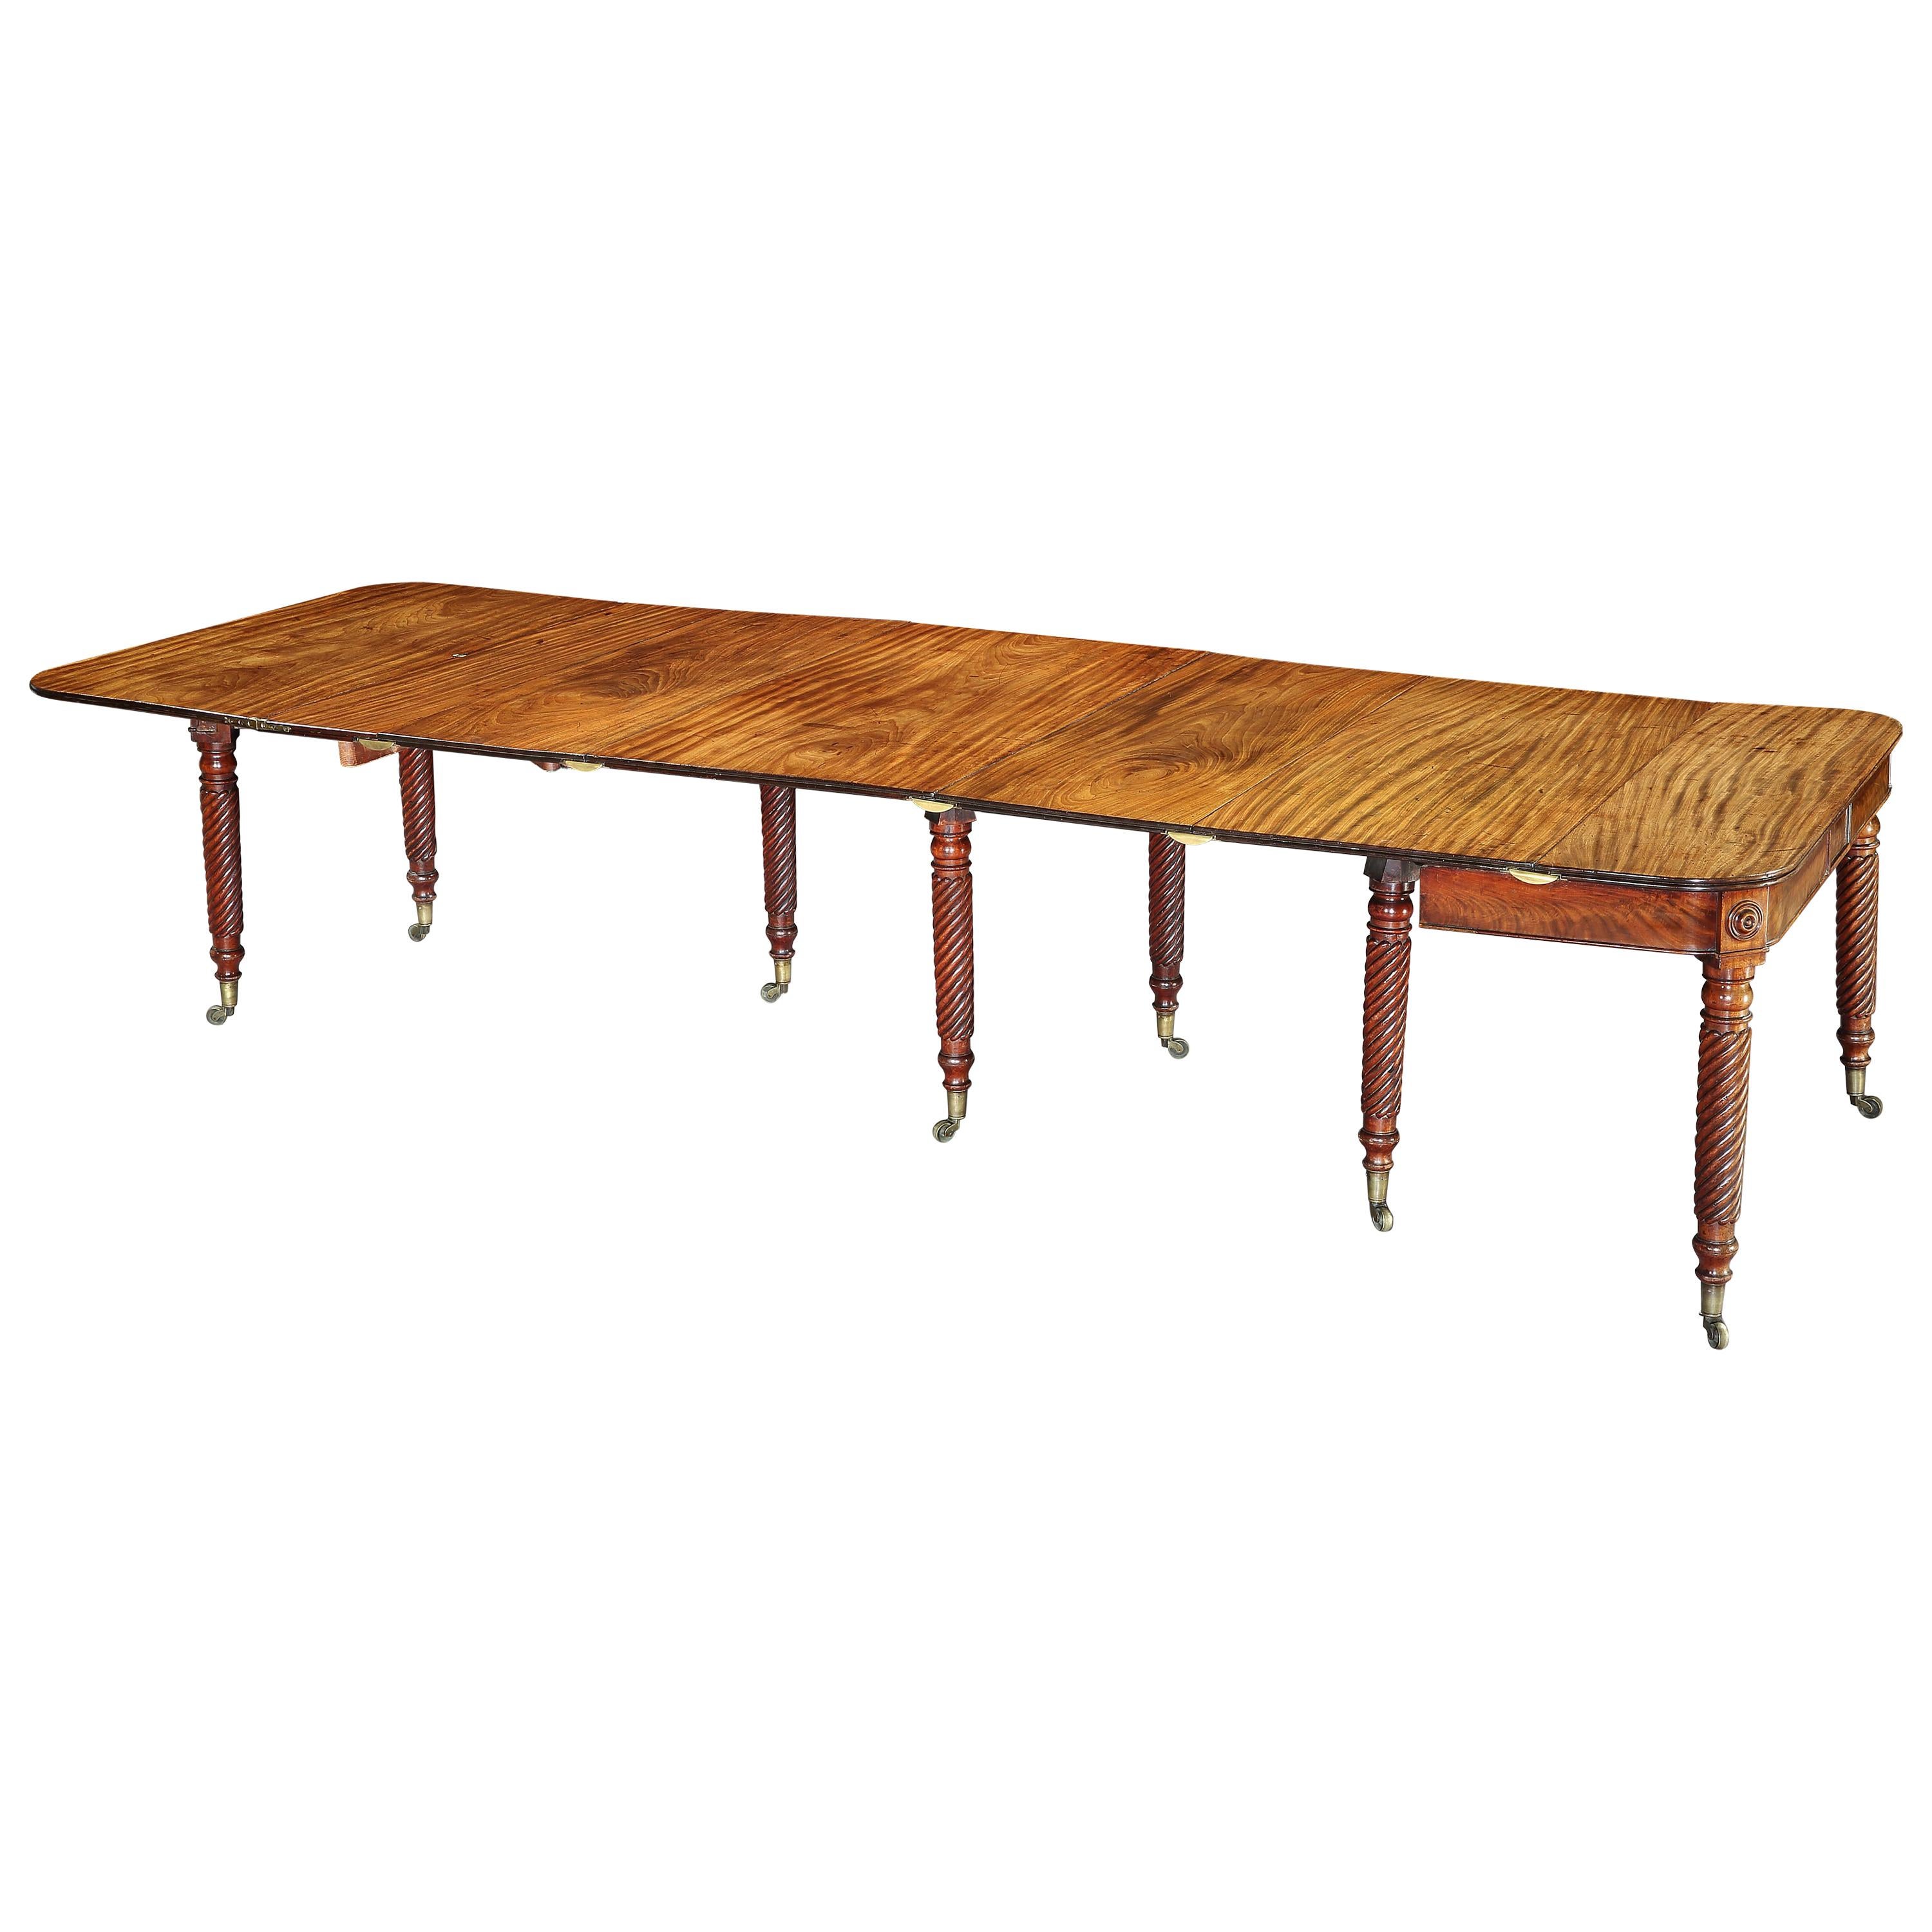 George III Mahogany Dining Table Attributed to Gillows im Angebot